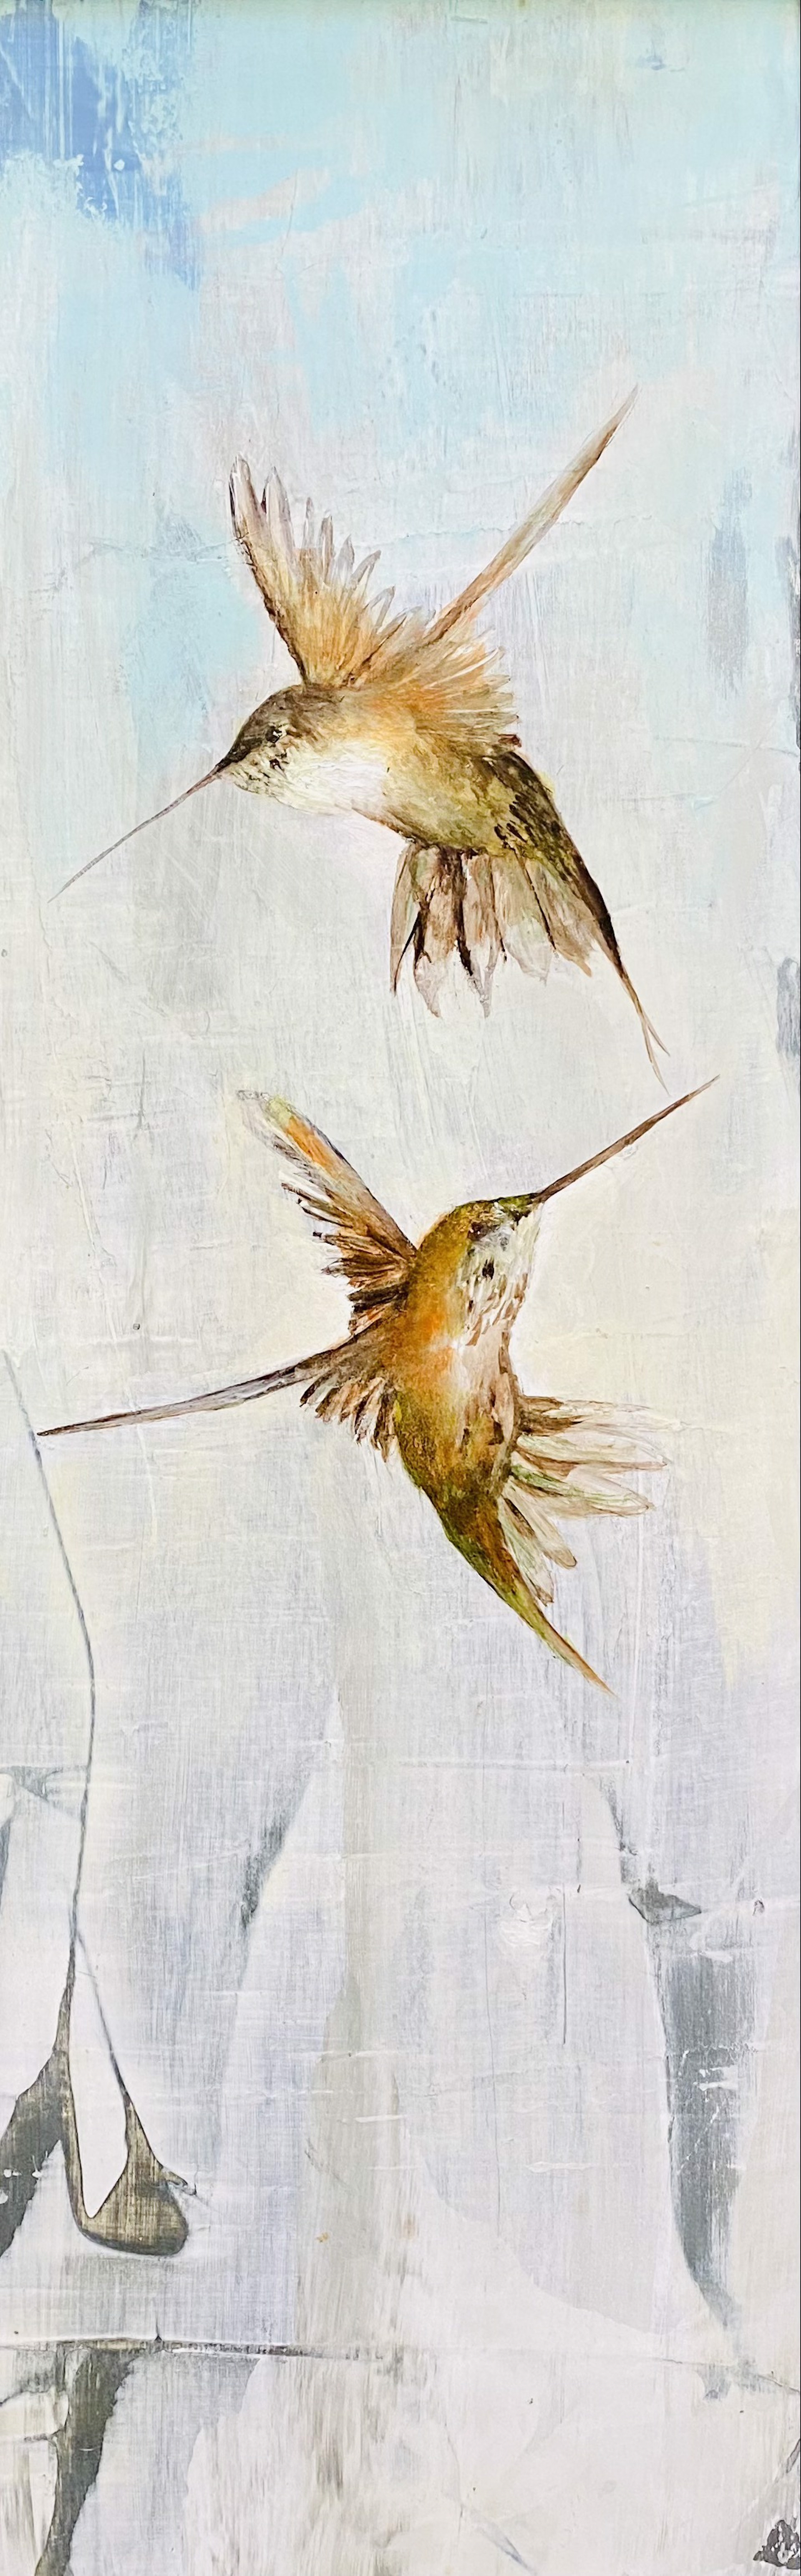 A Contemporary Oil Painting Of A Hummingbirds Flying With Blue And Grey In The Background By Jenna Von Benedikt Available At Gallery Wild